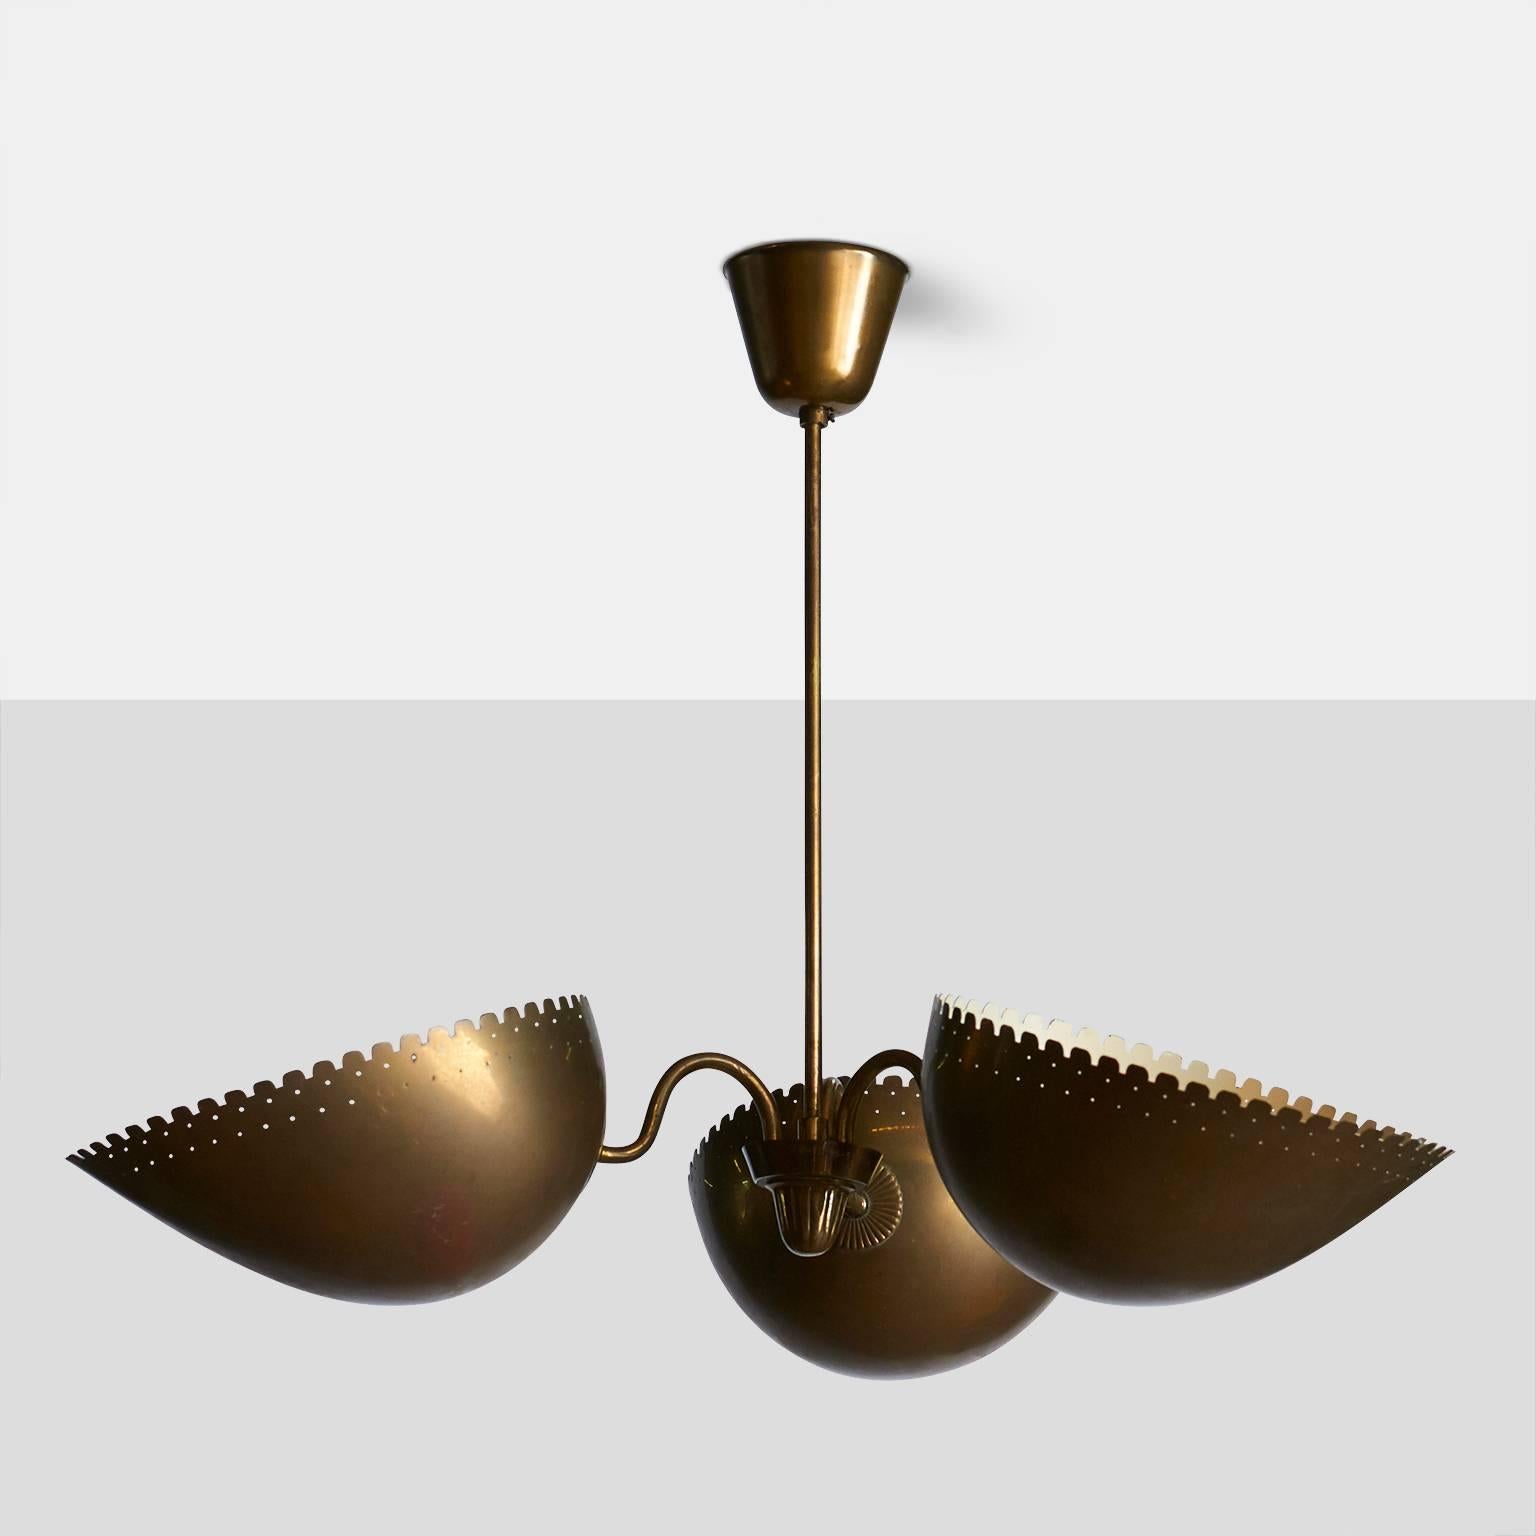 A wonderful aged brass pendant from Sweden by Bertil Brisborg for Bohlmarks. The lamp has three shades with serrated and perforated edges, facing upwards.
The lamp is marked by Bohlmarks,
Sweden, circa 1940s.